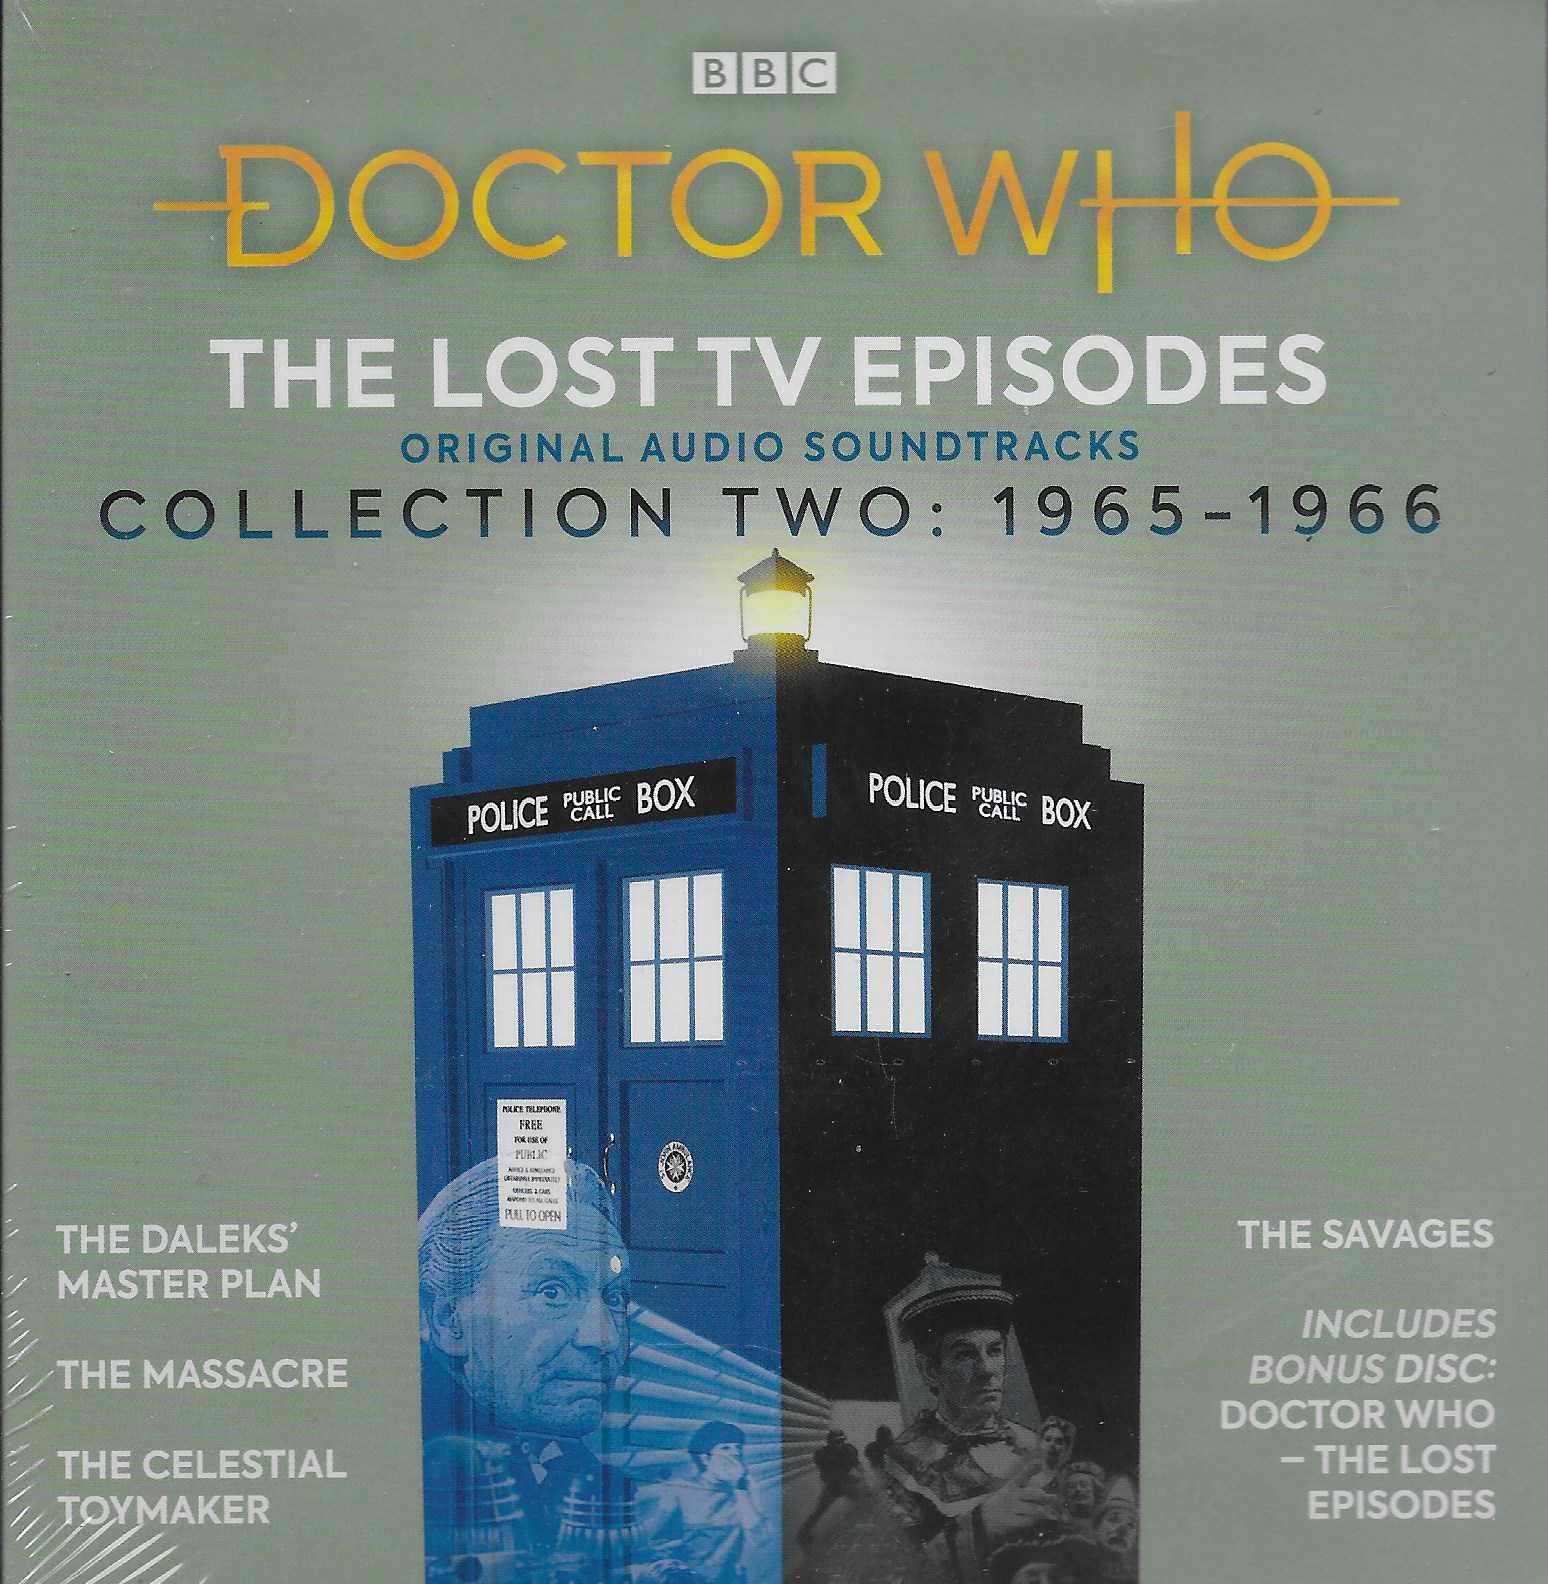 Picture of ISBN 978-1-78753-750-7 Doctor Who - The lost TV episodes - Collection two: 1965-1966 by artist Various from the BBC records and Tapes library